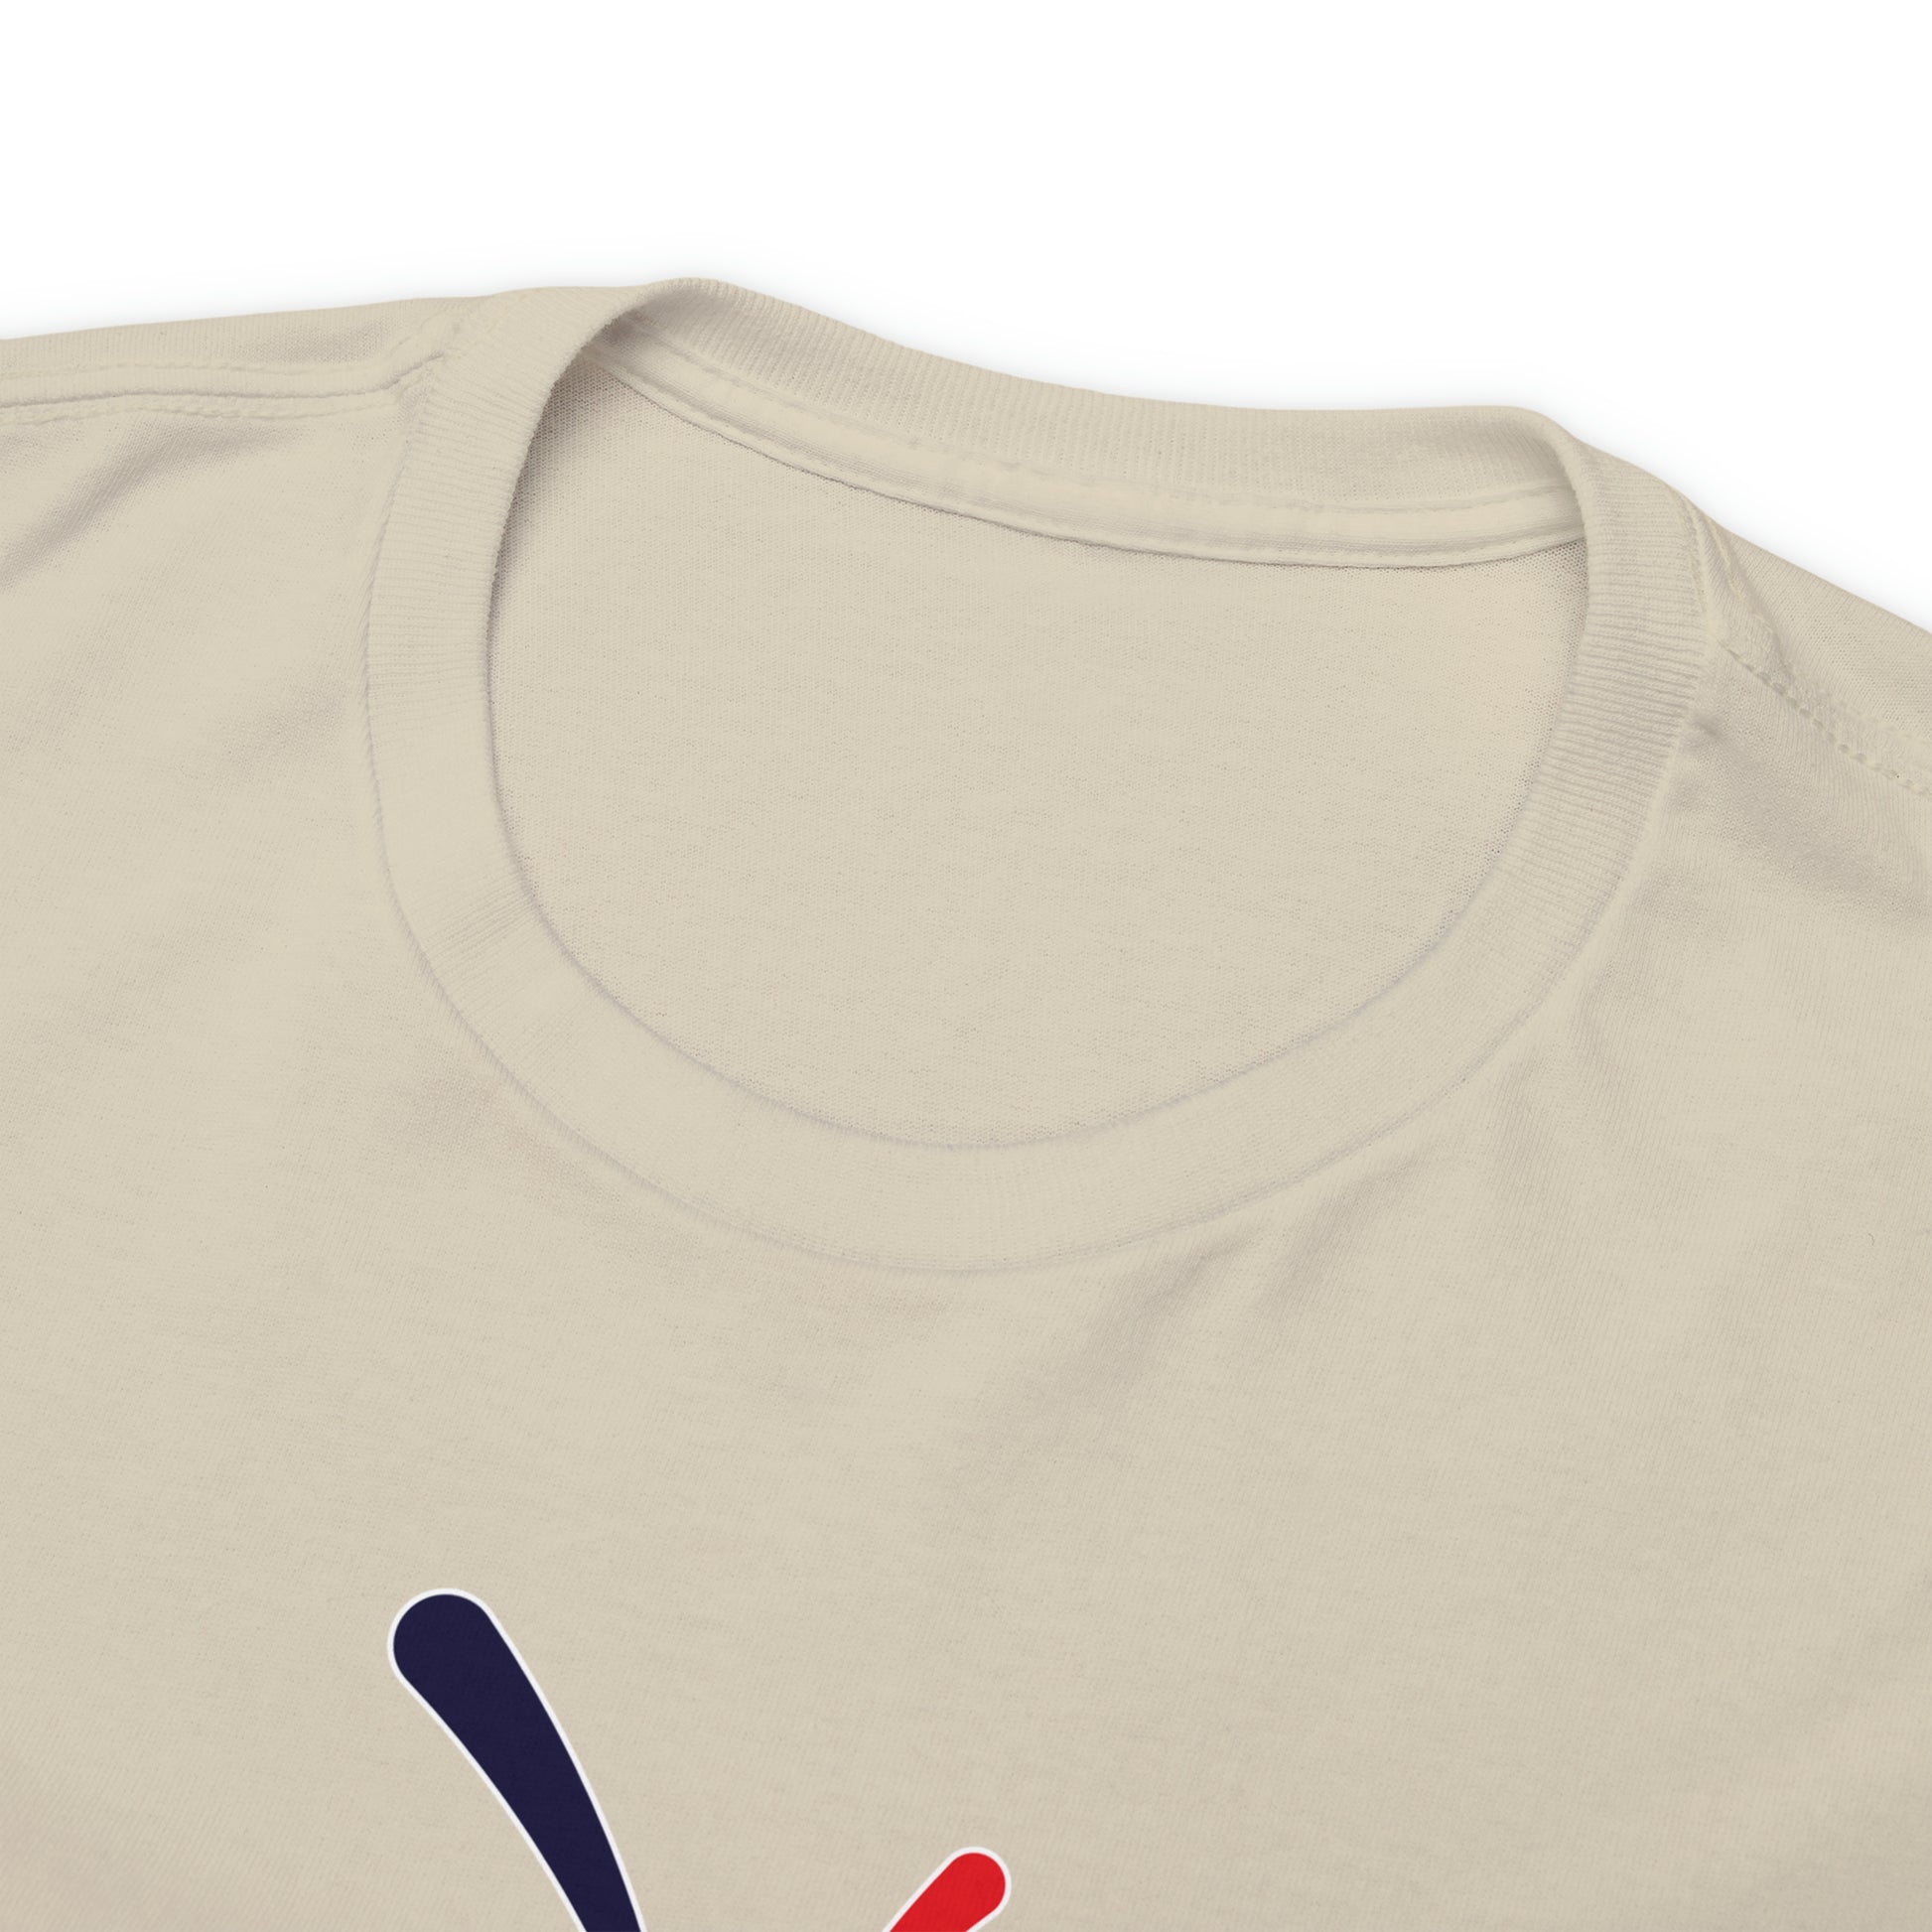 Front neck view of the Sand t-shirt